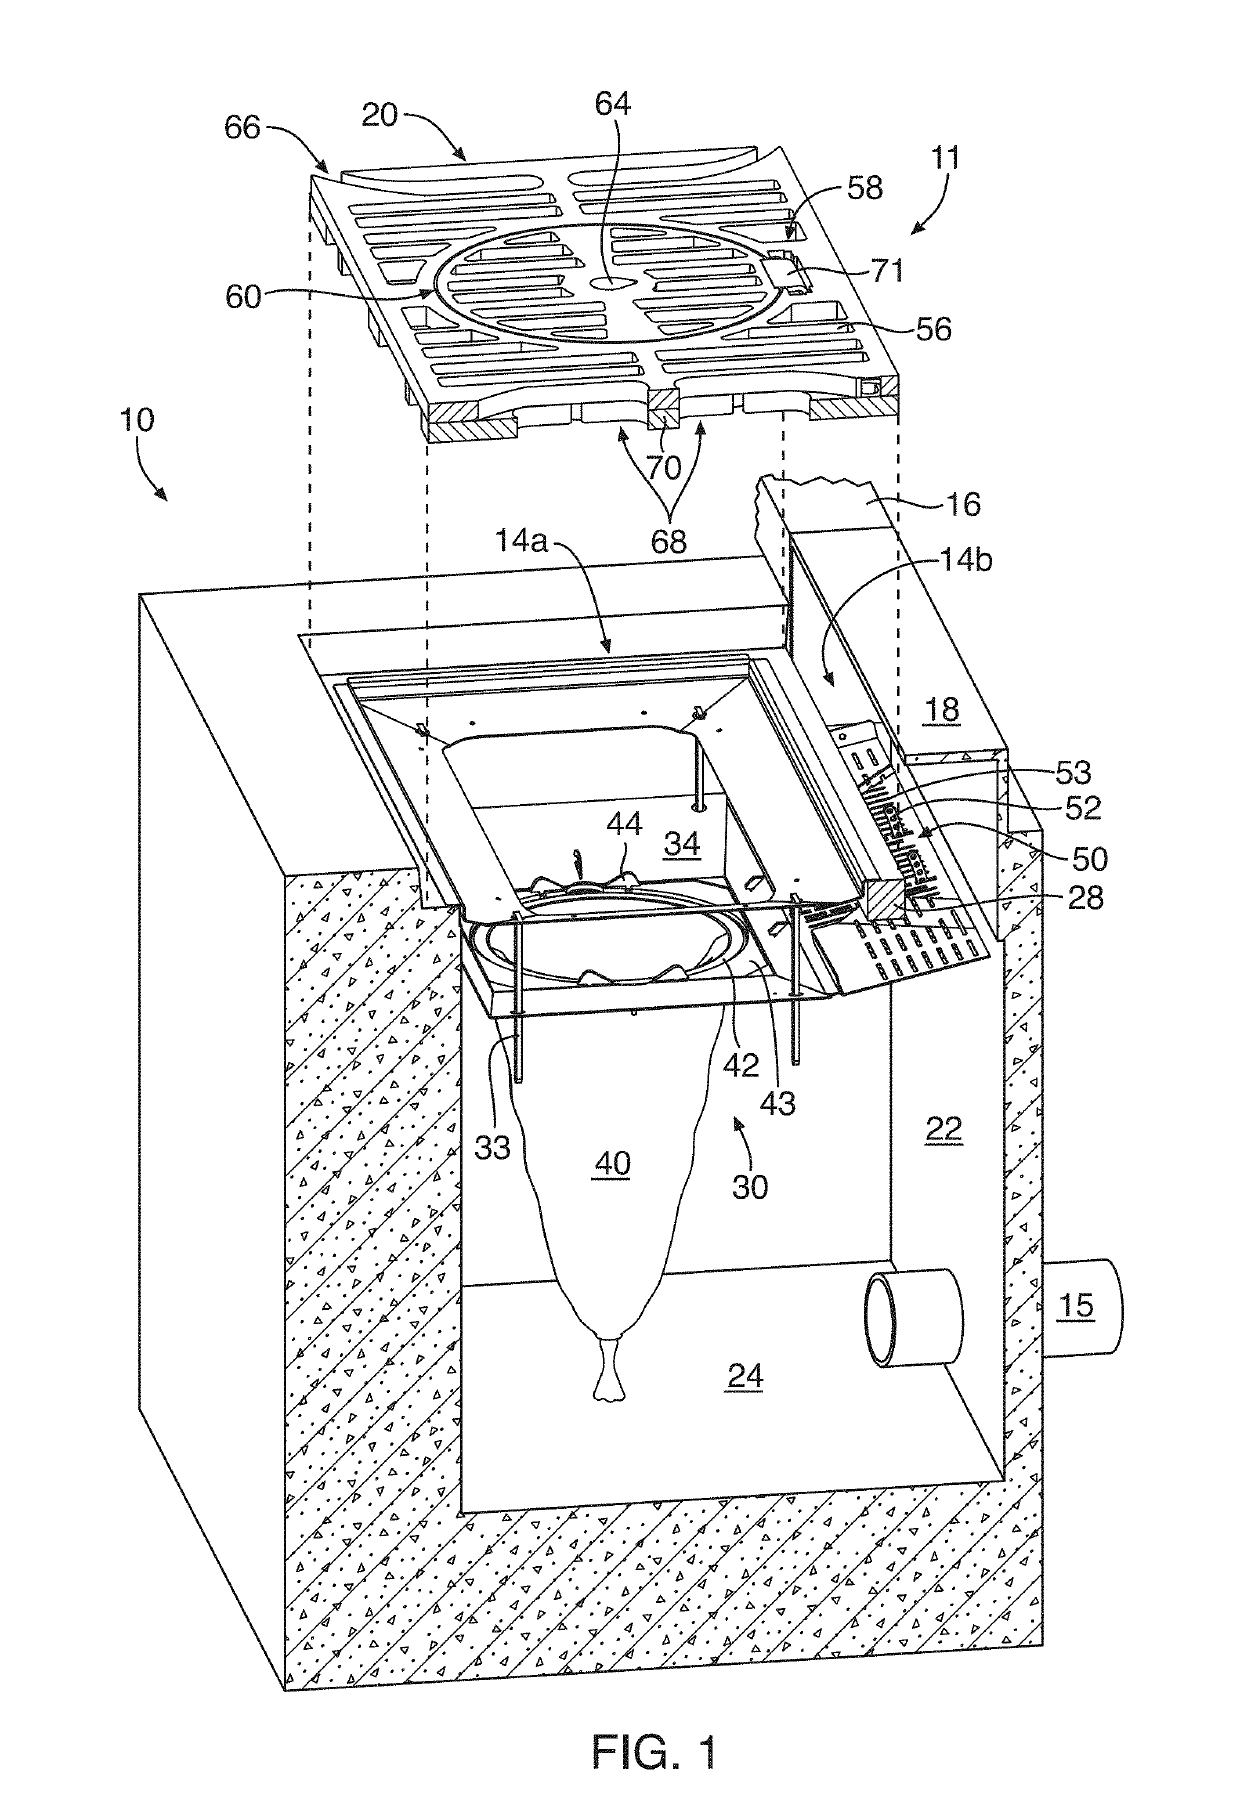 Storm drain grate and filter apparatus and method